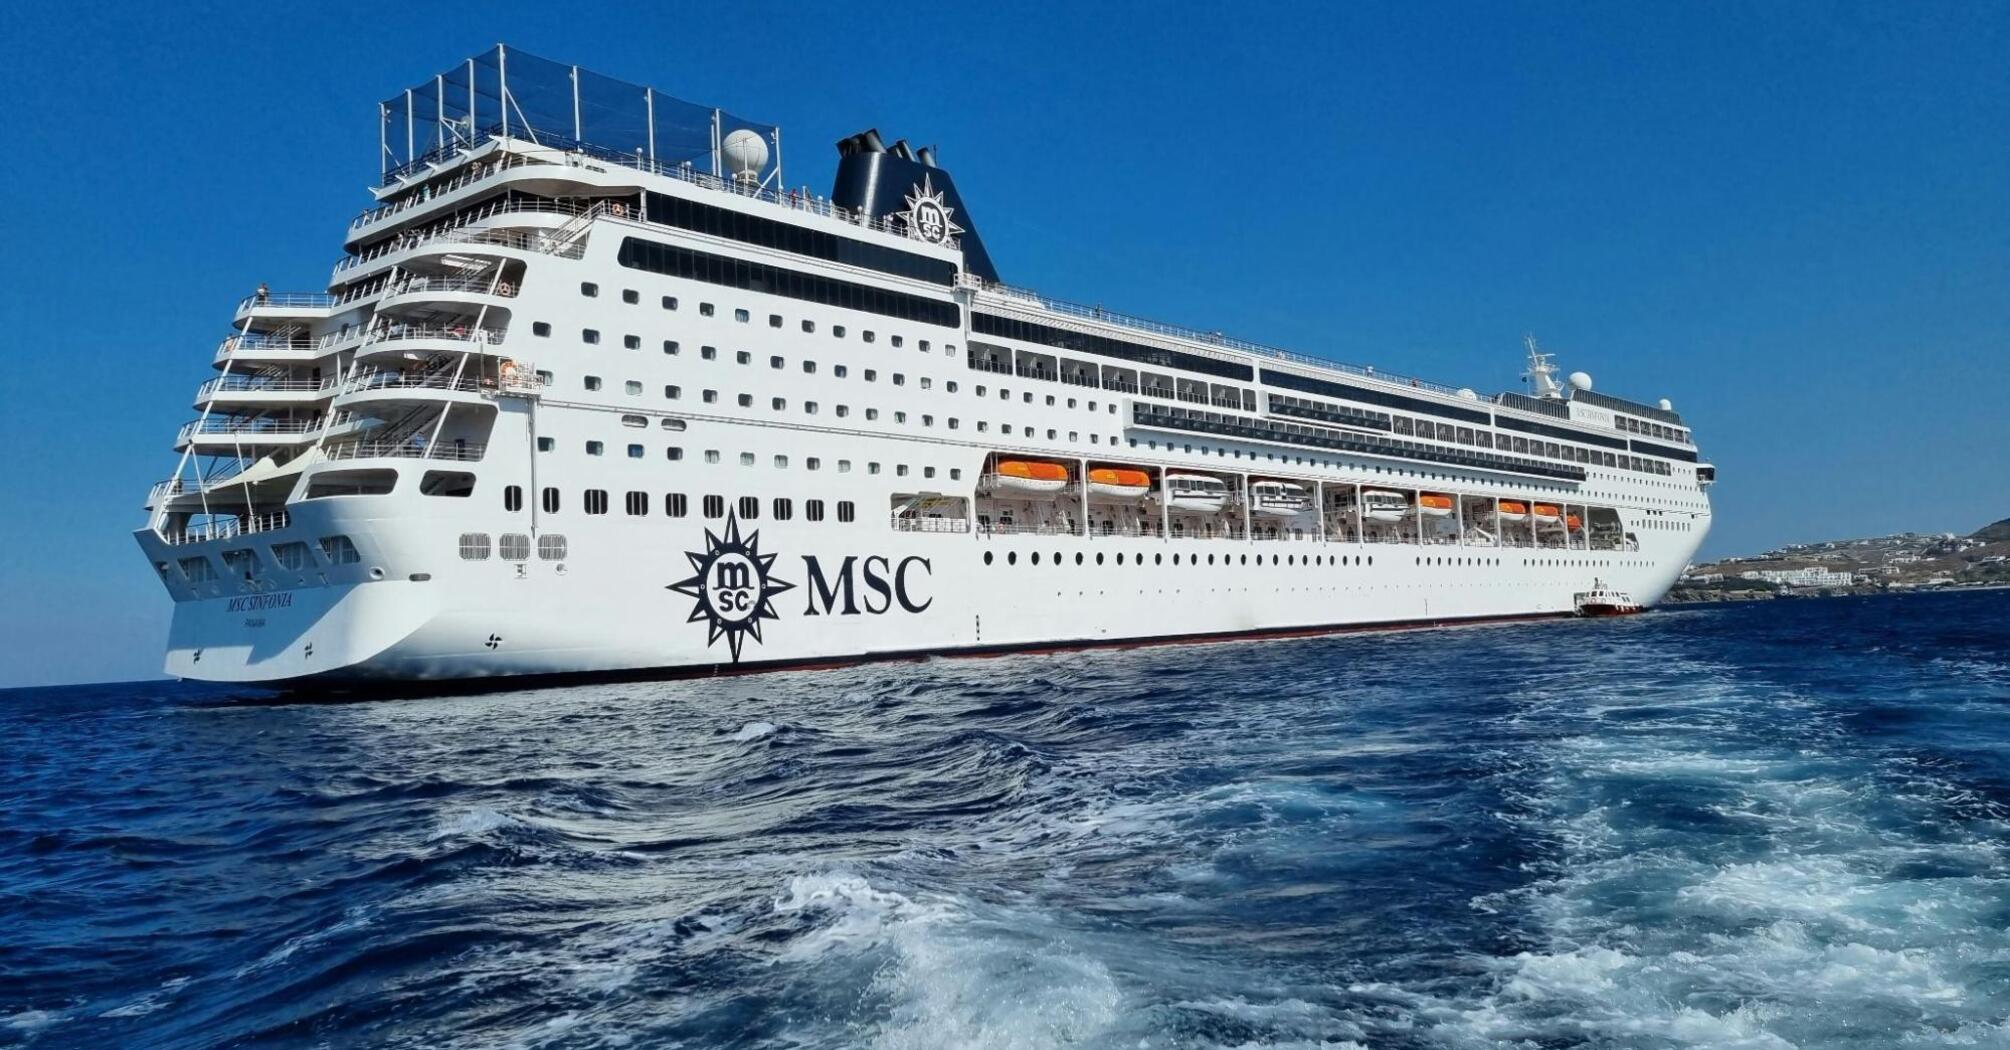 MSC cruise ship in all its glory